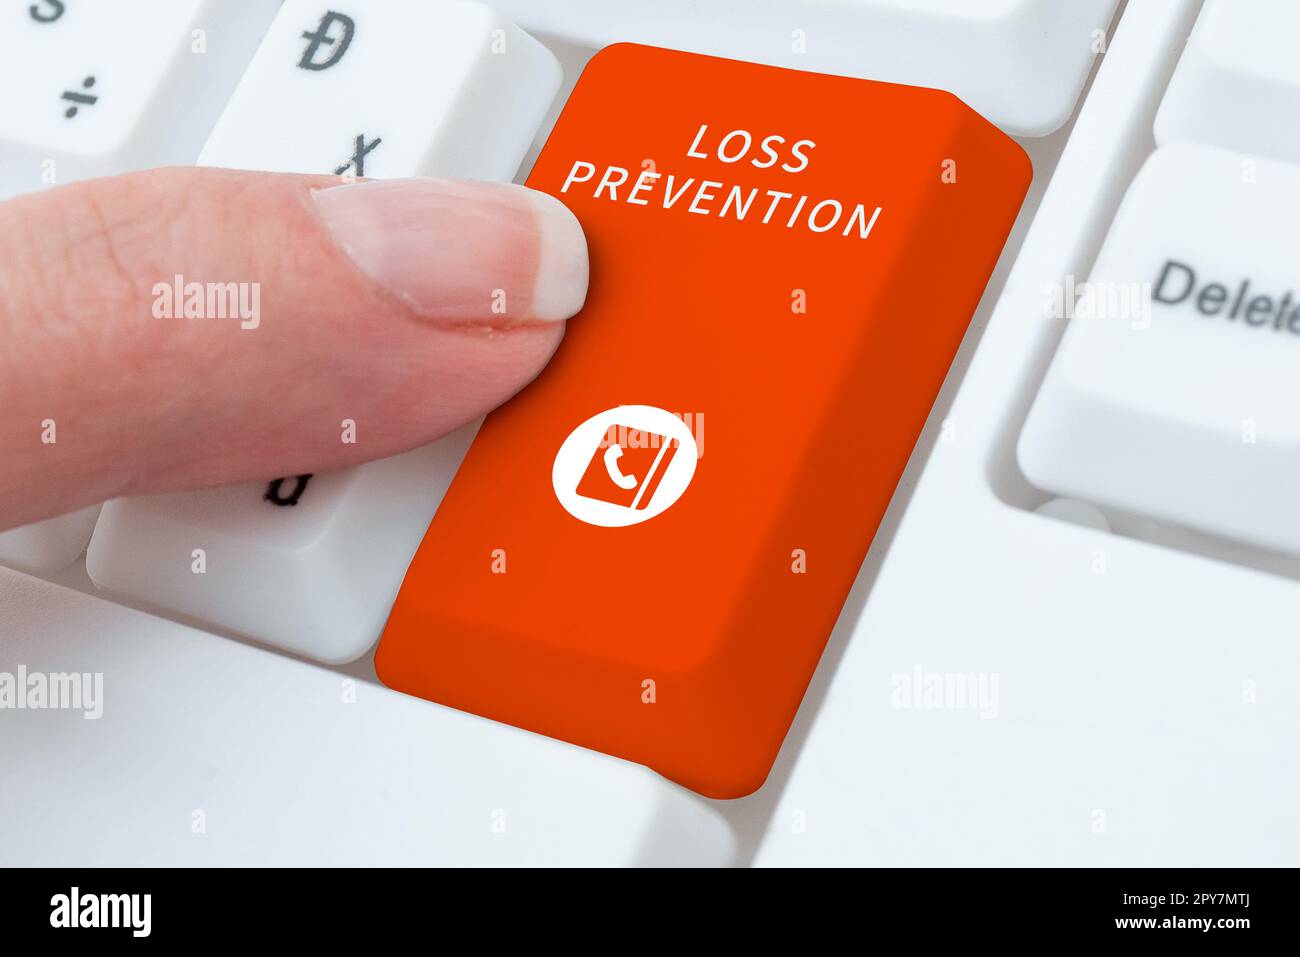 Text sign showing Loss Prevention. Conceptual photo the fact that you no longer have something or have less of something Stock Photo